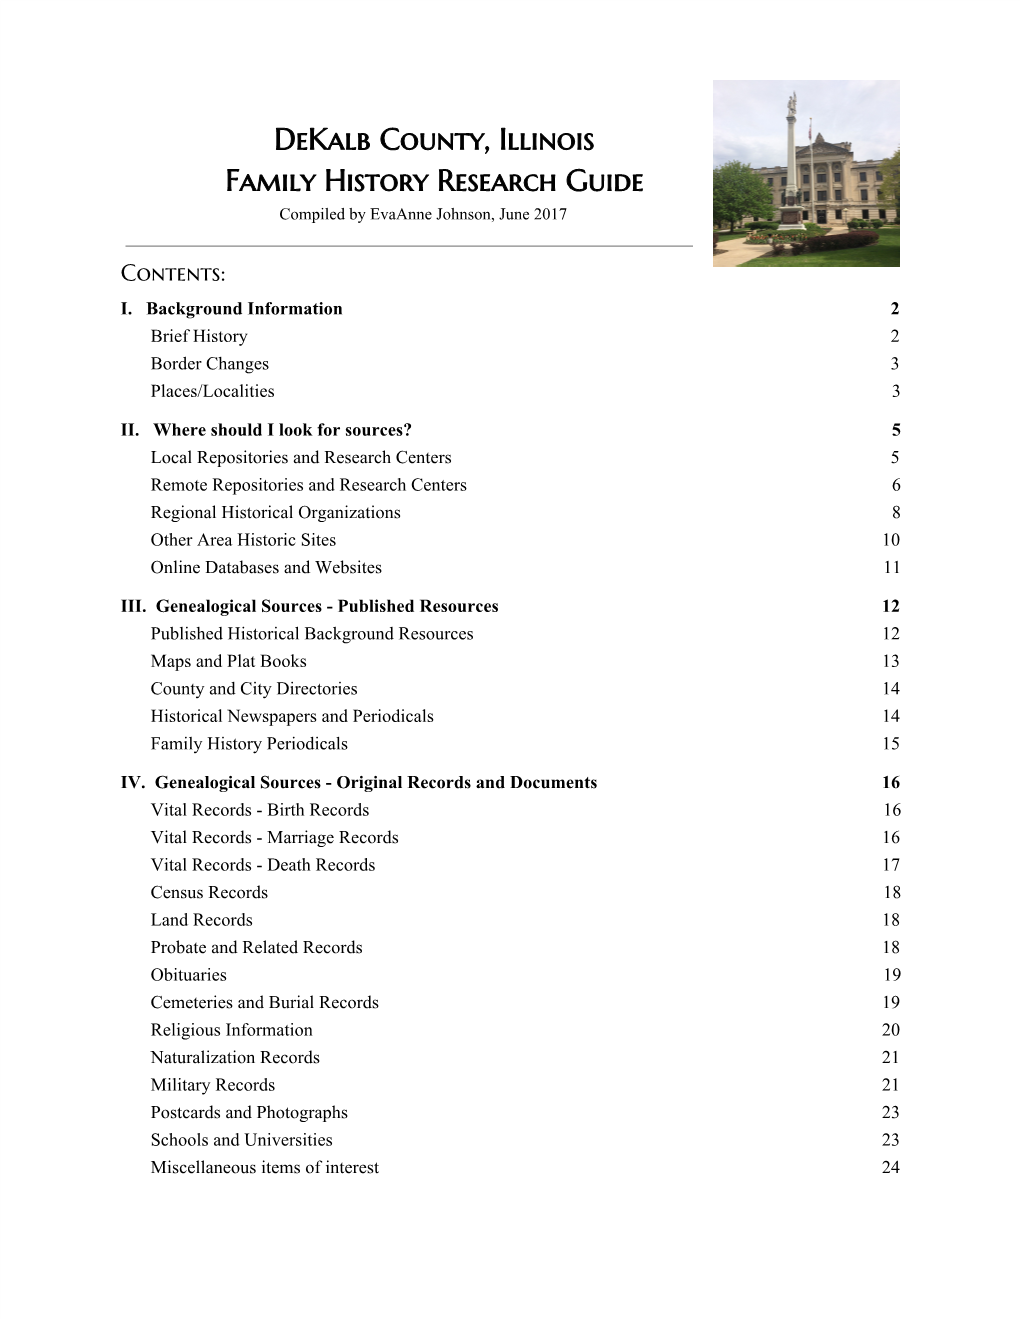 Dekalb County, Illinois Family History Research Guide Compiled by Evaanne Johnson, June 2017